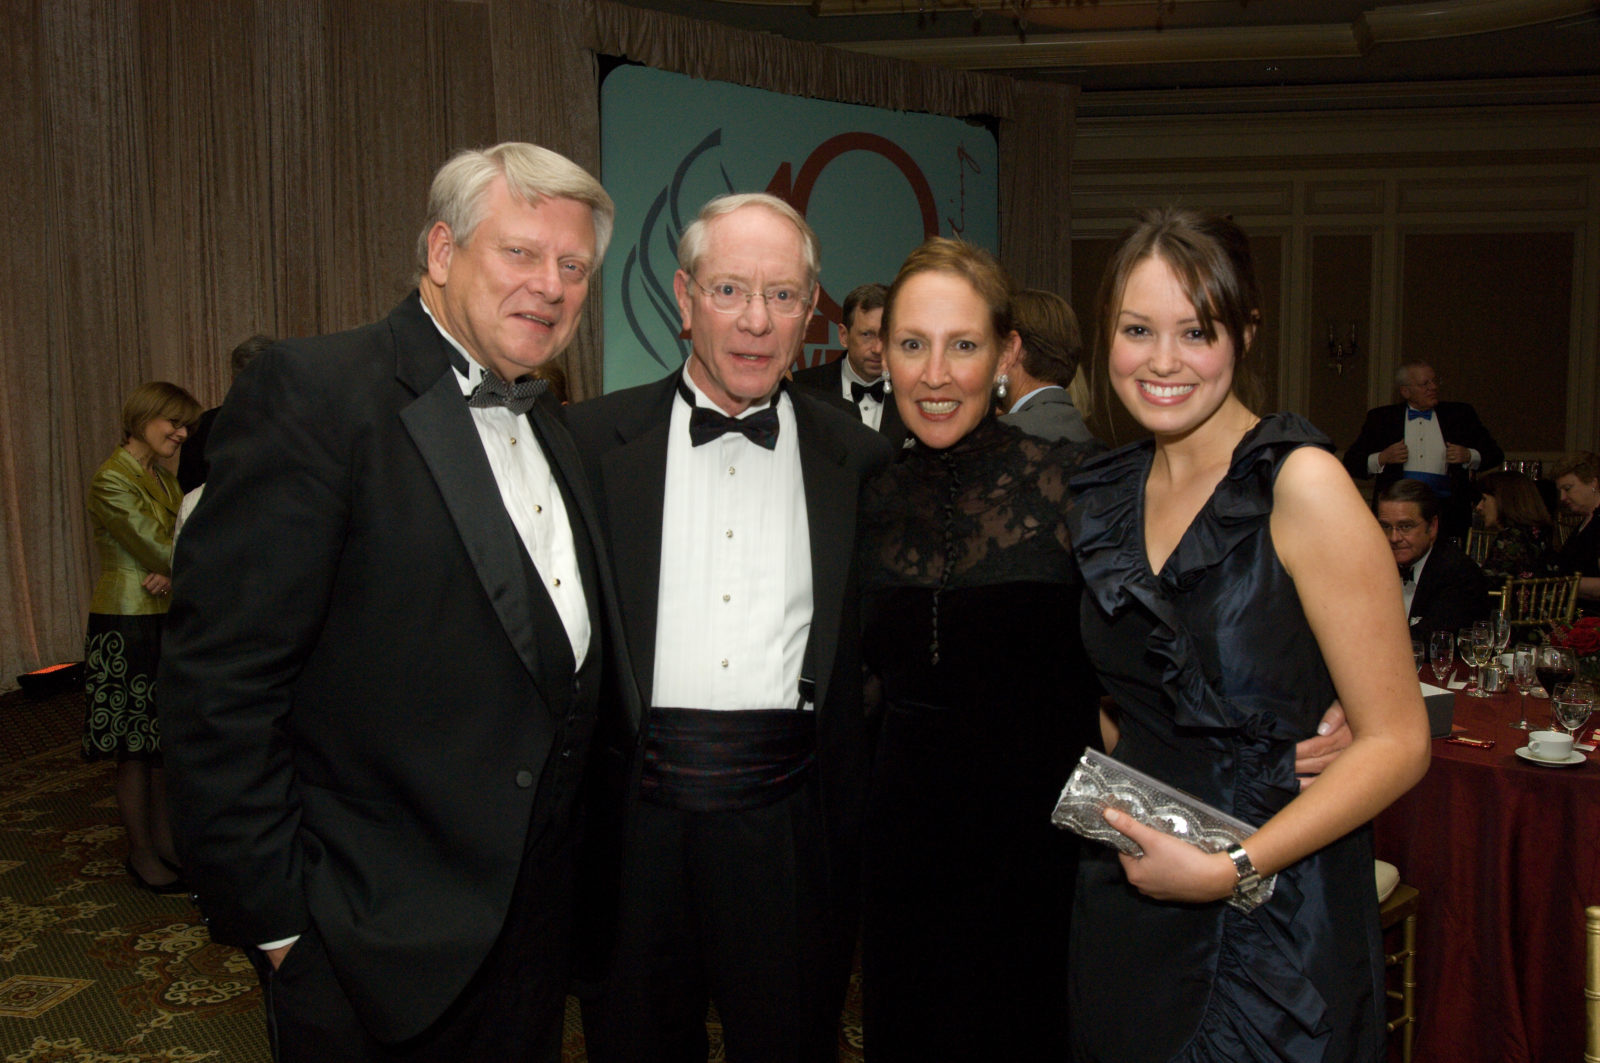 (r.) Loren Streit (B 05), seen here with (from left) Chairman Randy Teague and donors Frank and Kathleen Lauinger, used her TFAS internship connections to start her career in D.C.